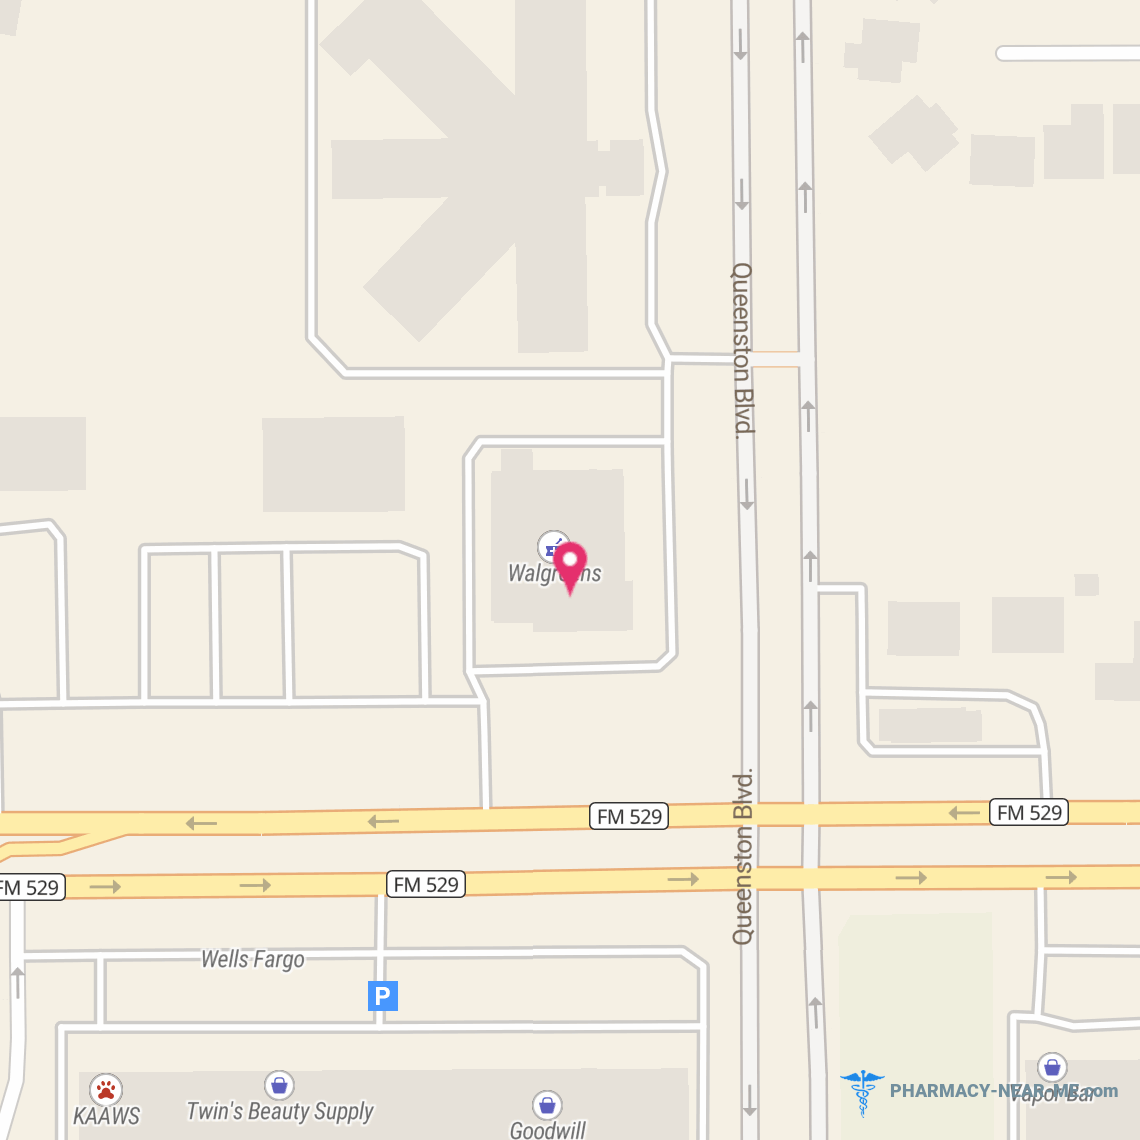 WALGREENS #07381 - Pharmacy Hours, Phone, Reviews & Information: 17150 Spencer Road, Houston, Texas 77095, United States